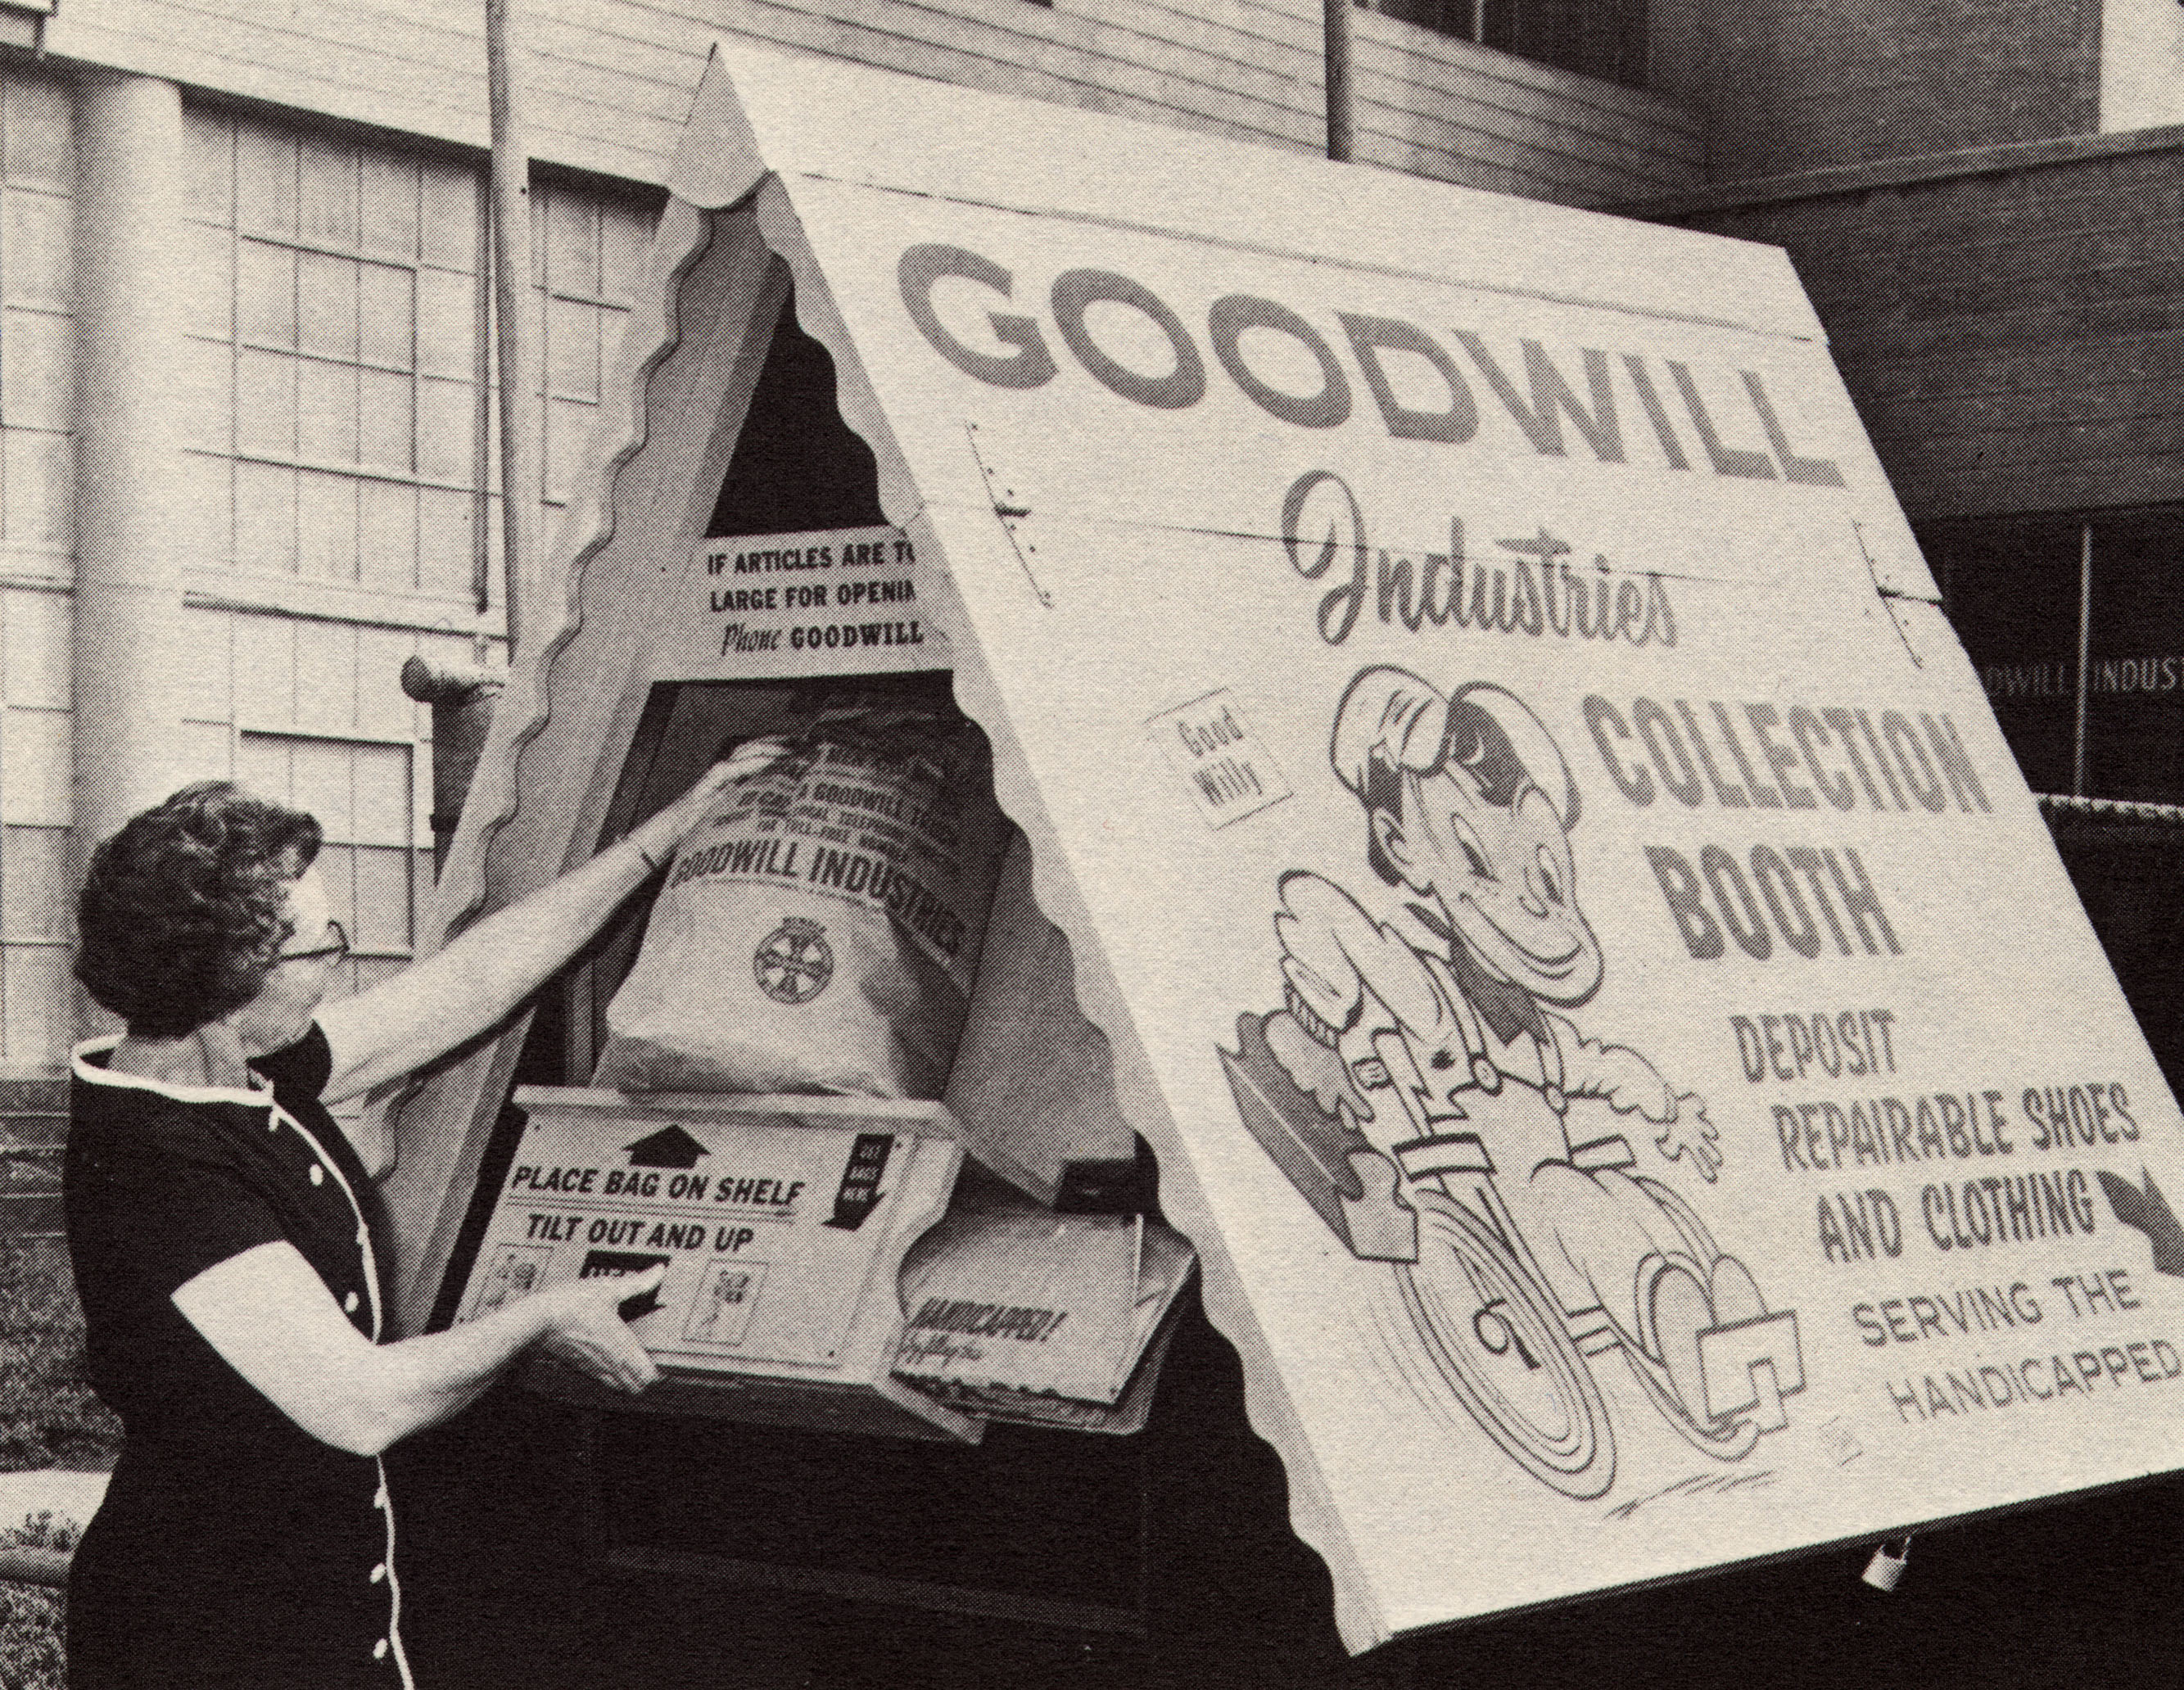 Goodwill Collection Booth History